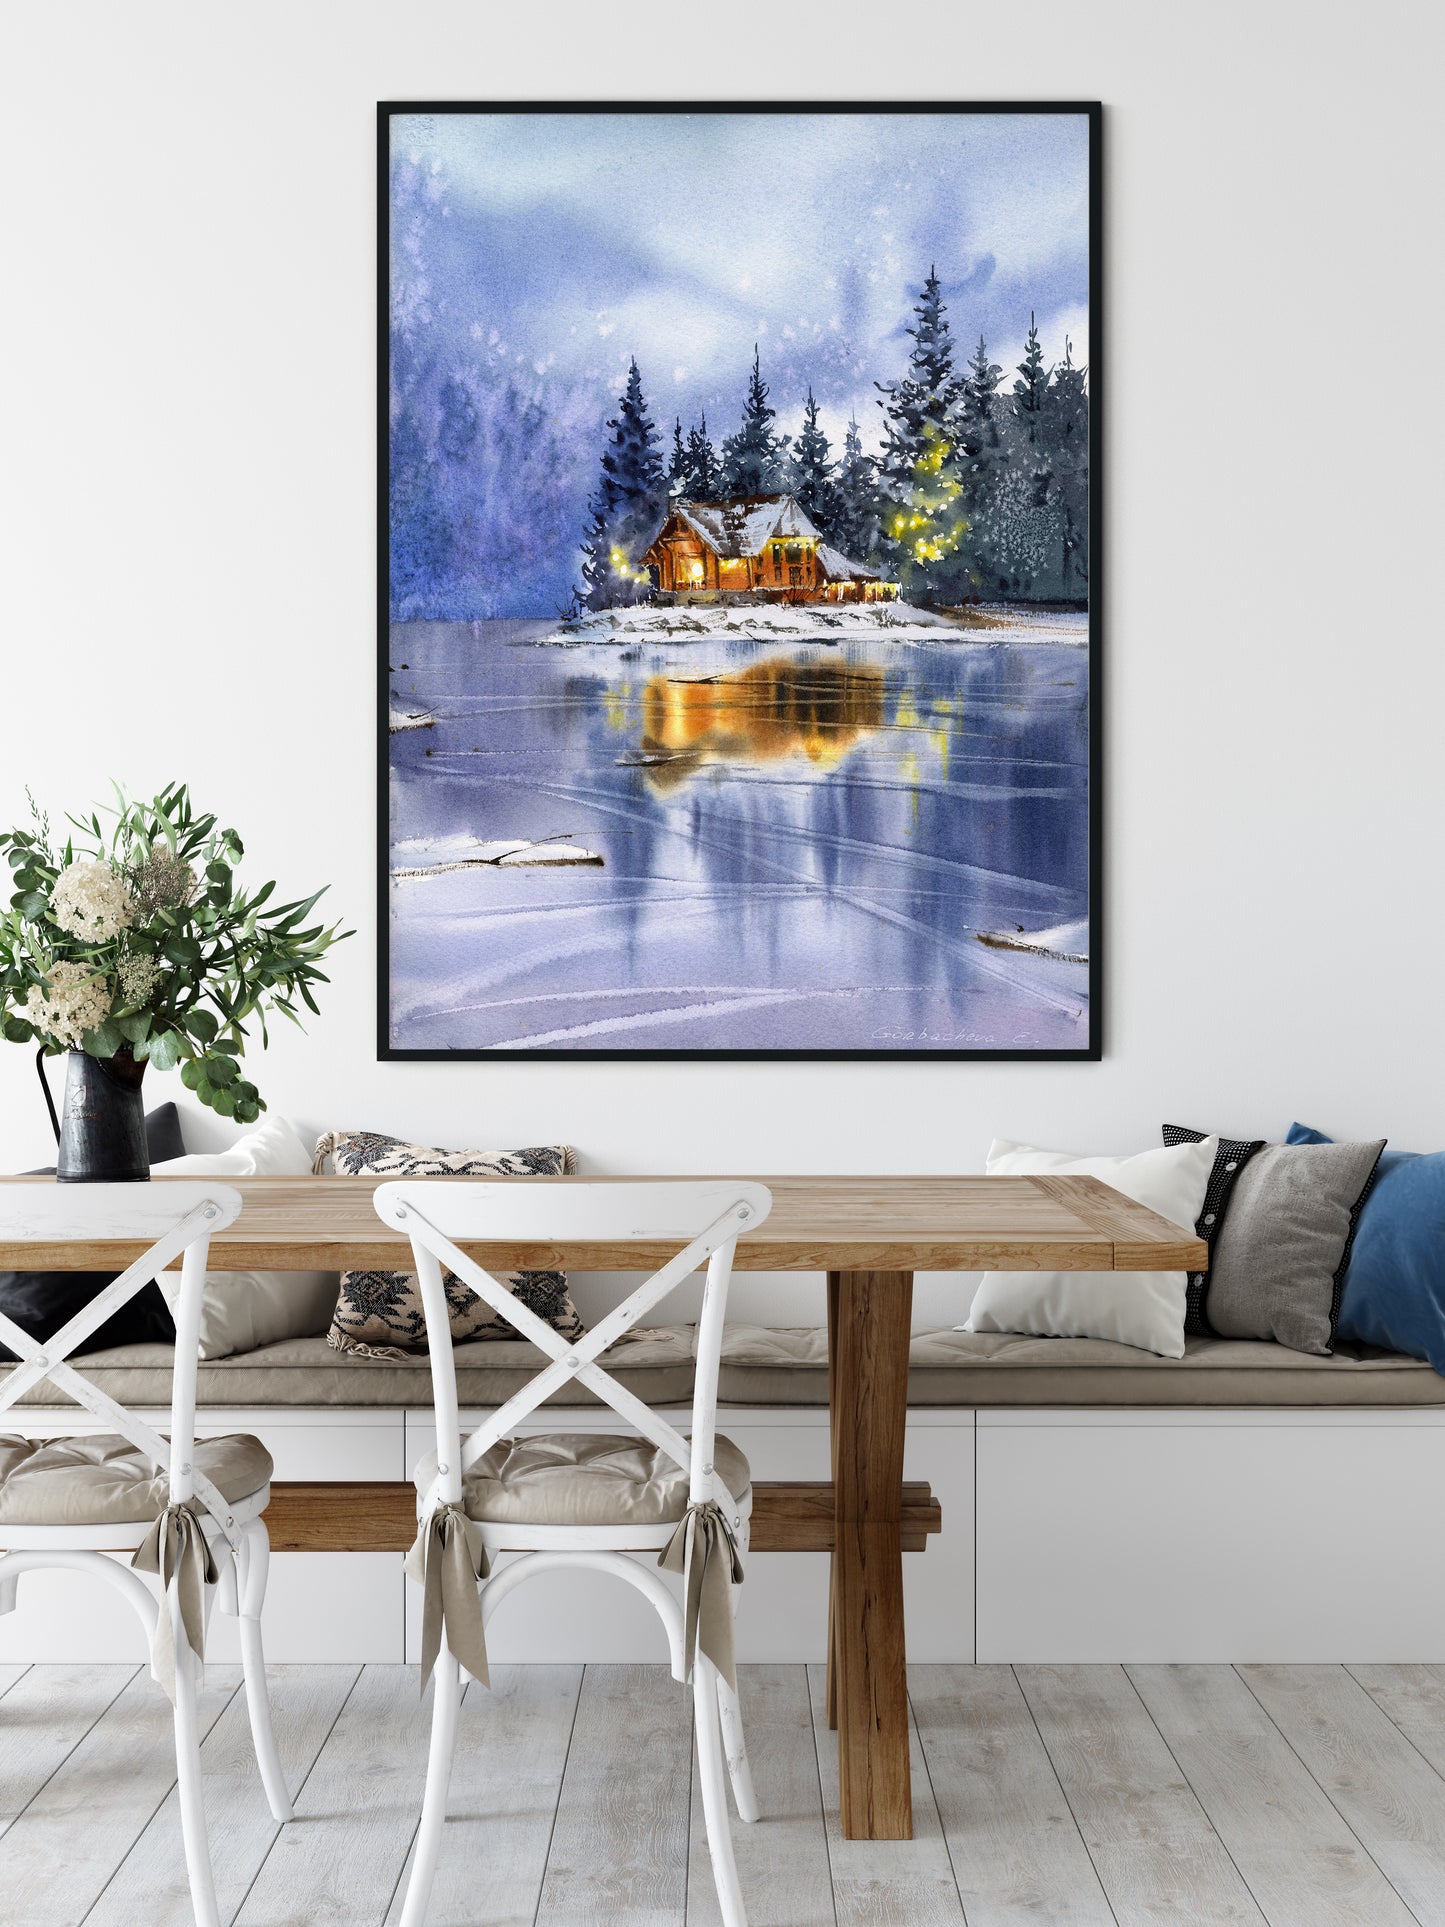 Winter Print, Watercolor Christmas Painting, Holiday Wall Art, Lake House Decor, Snowy Landscape Artwork